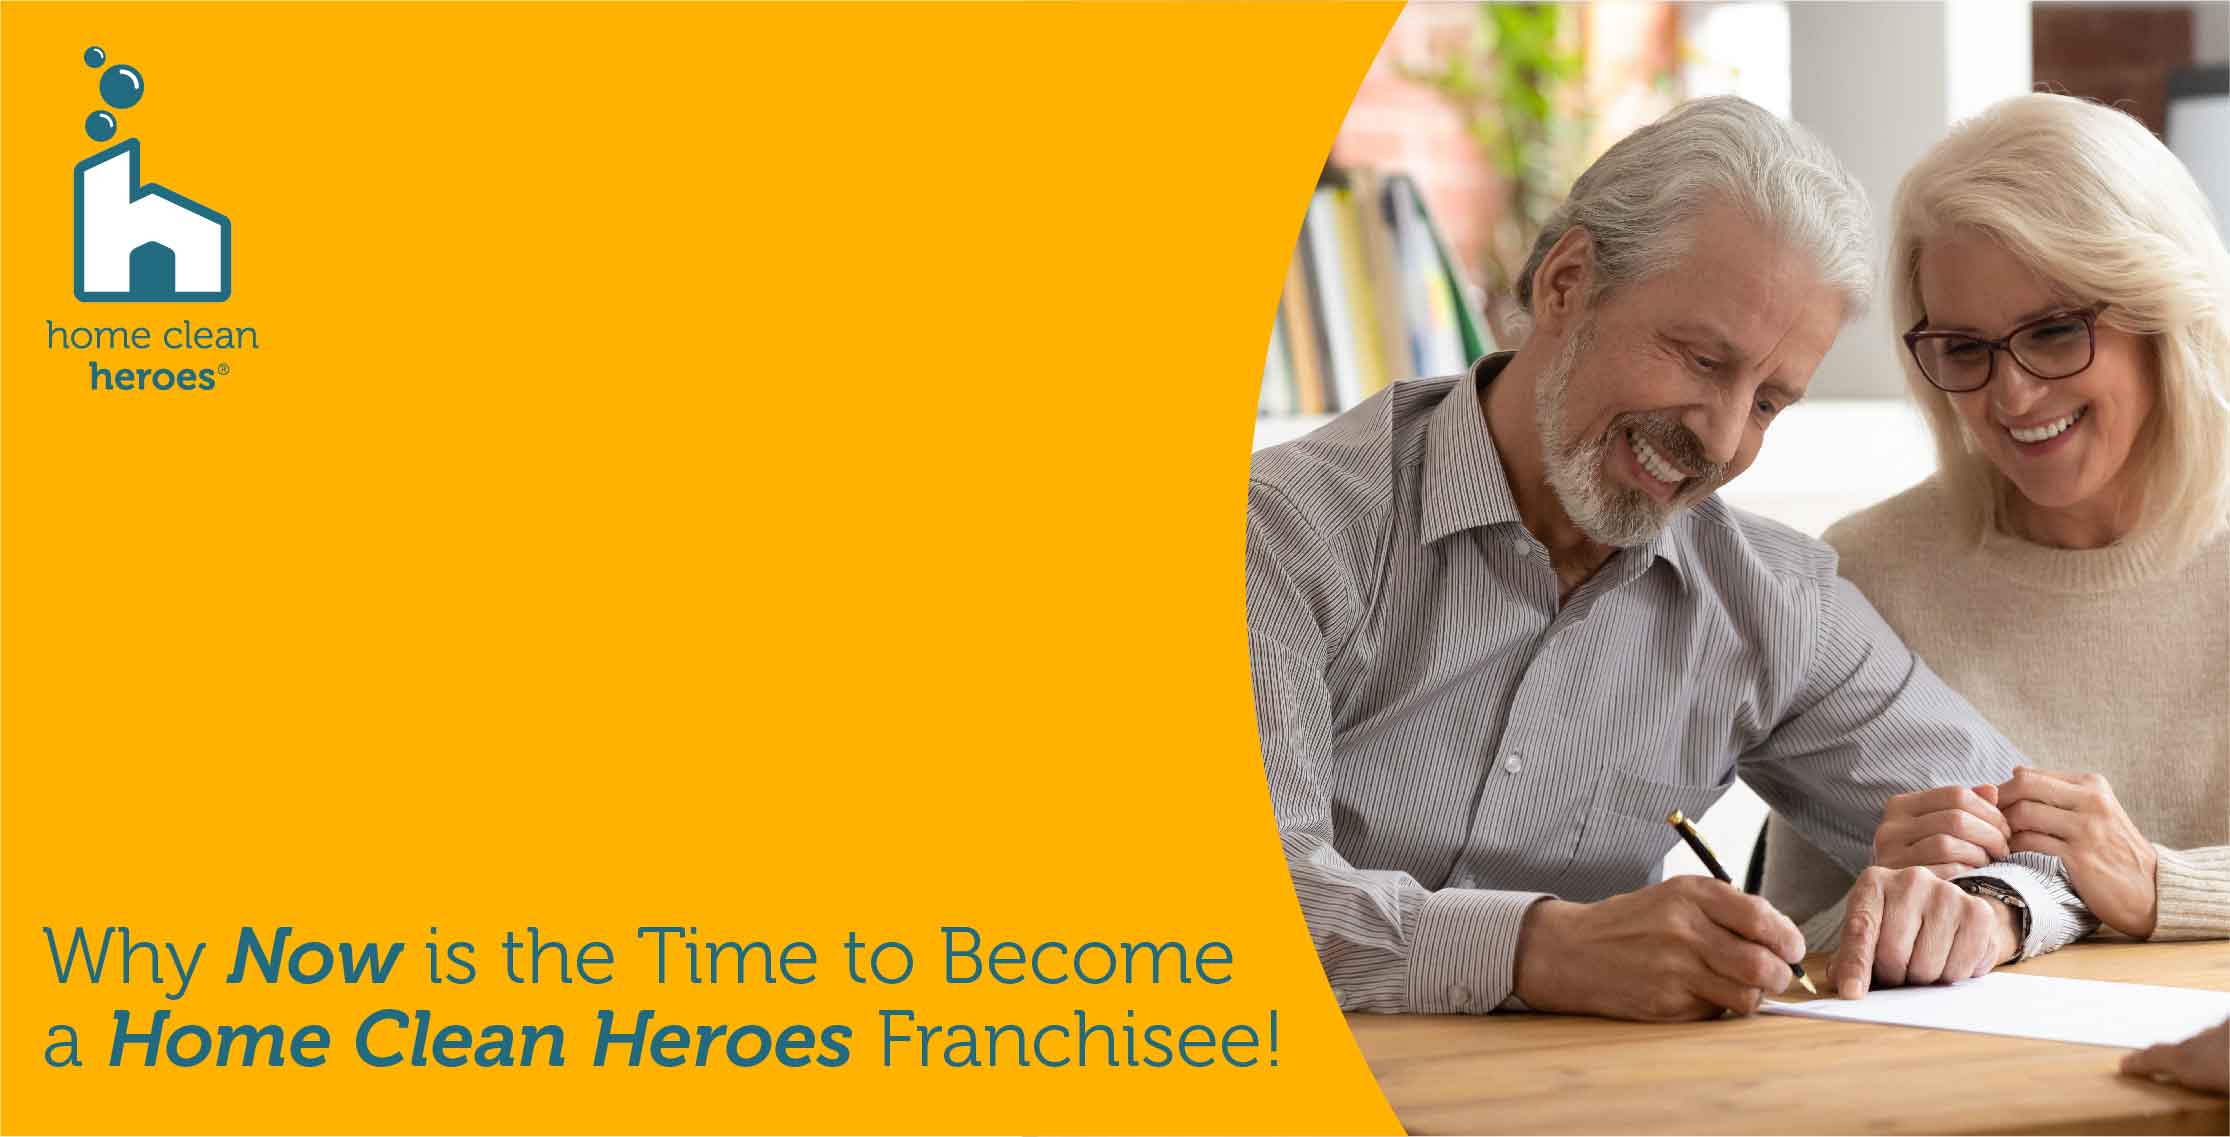 Why Now Is The Time To Become a Home Clean Heroes Franchisee